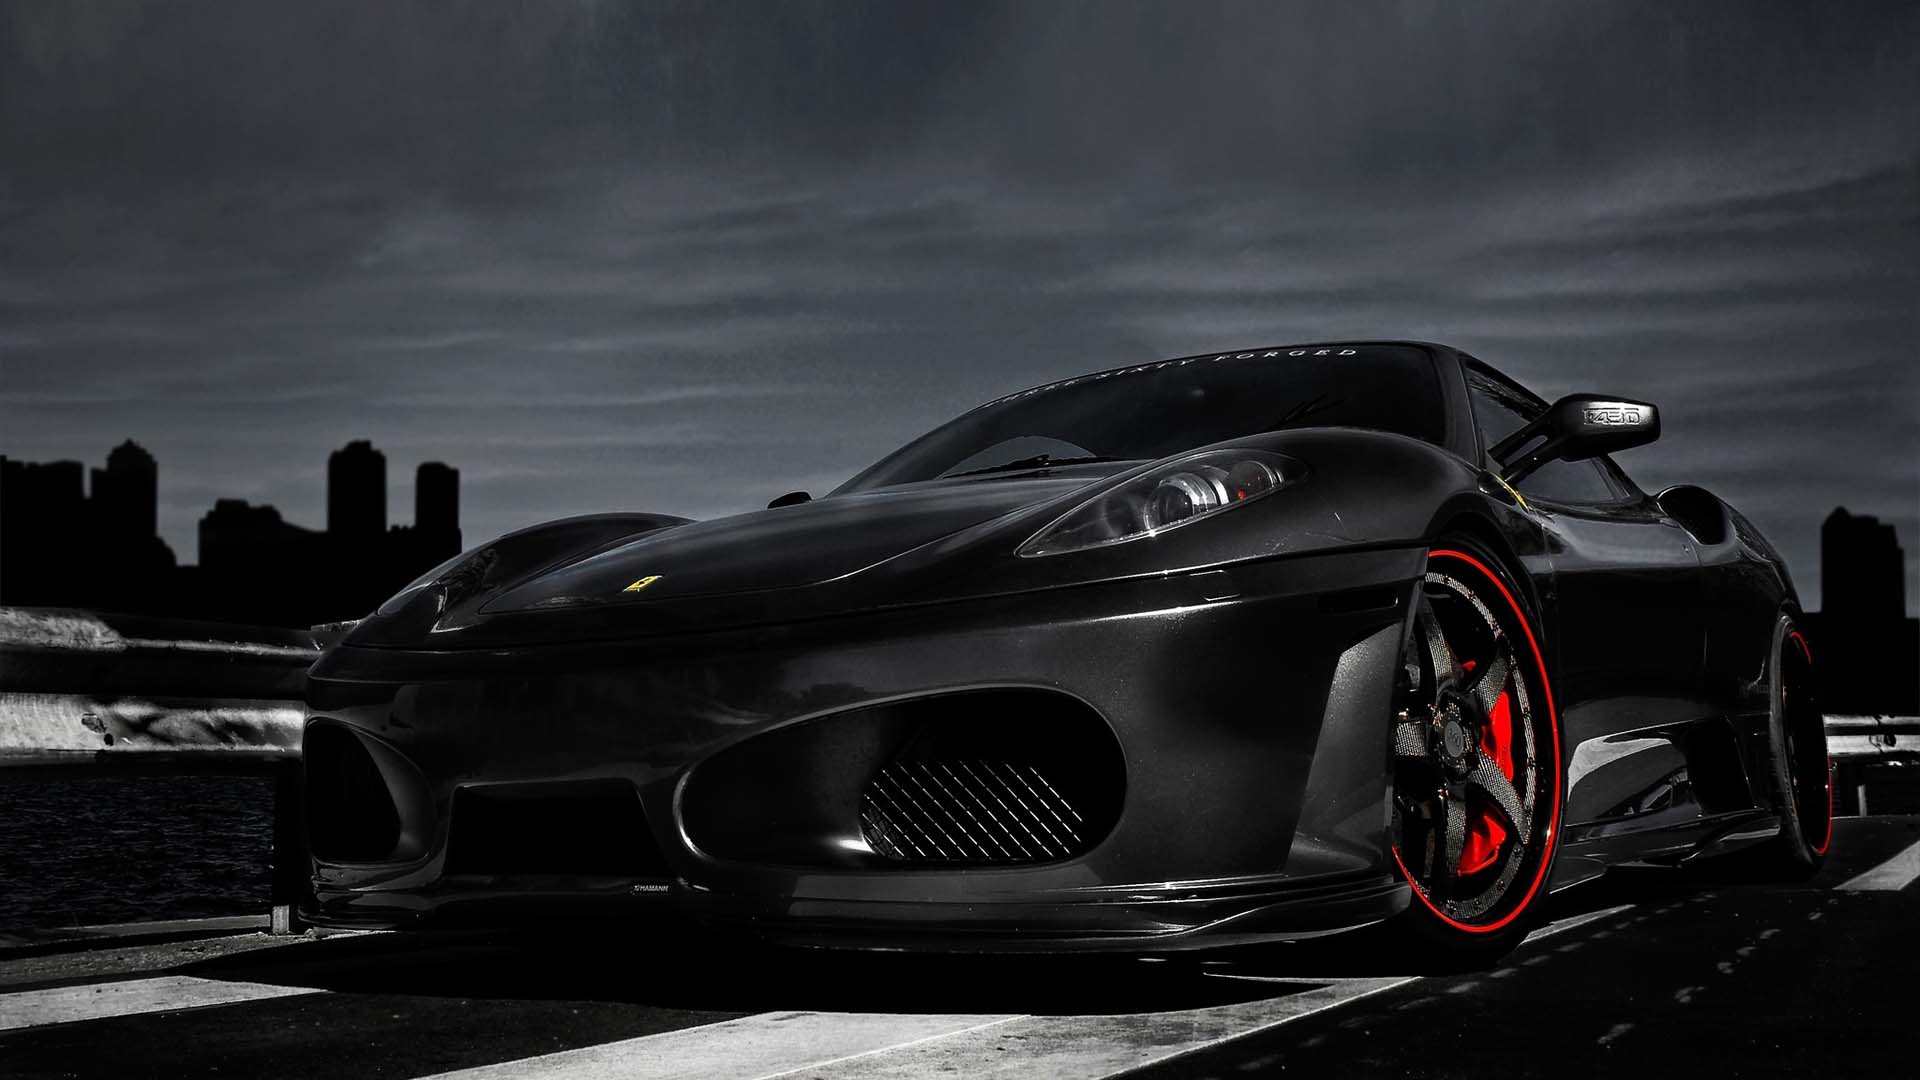  to Coolest Collection of Ferrari Wallpaper Backgrounds In HD